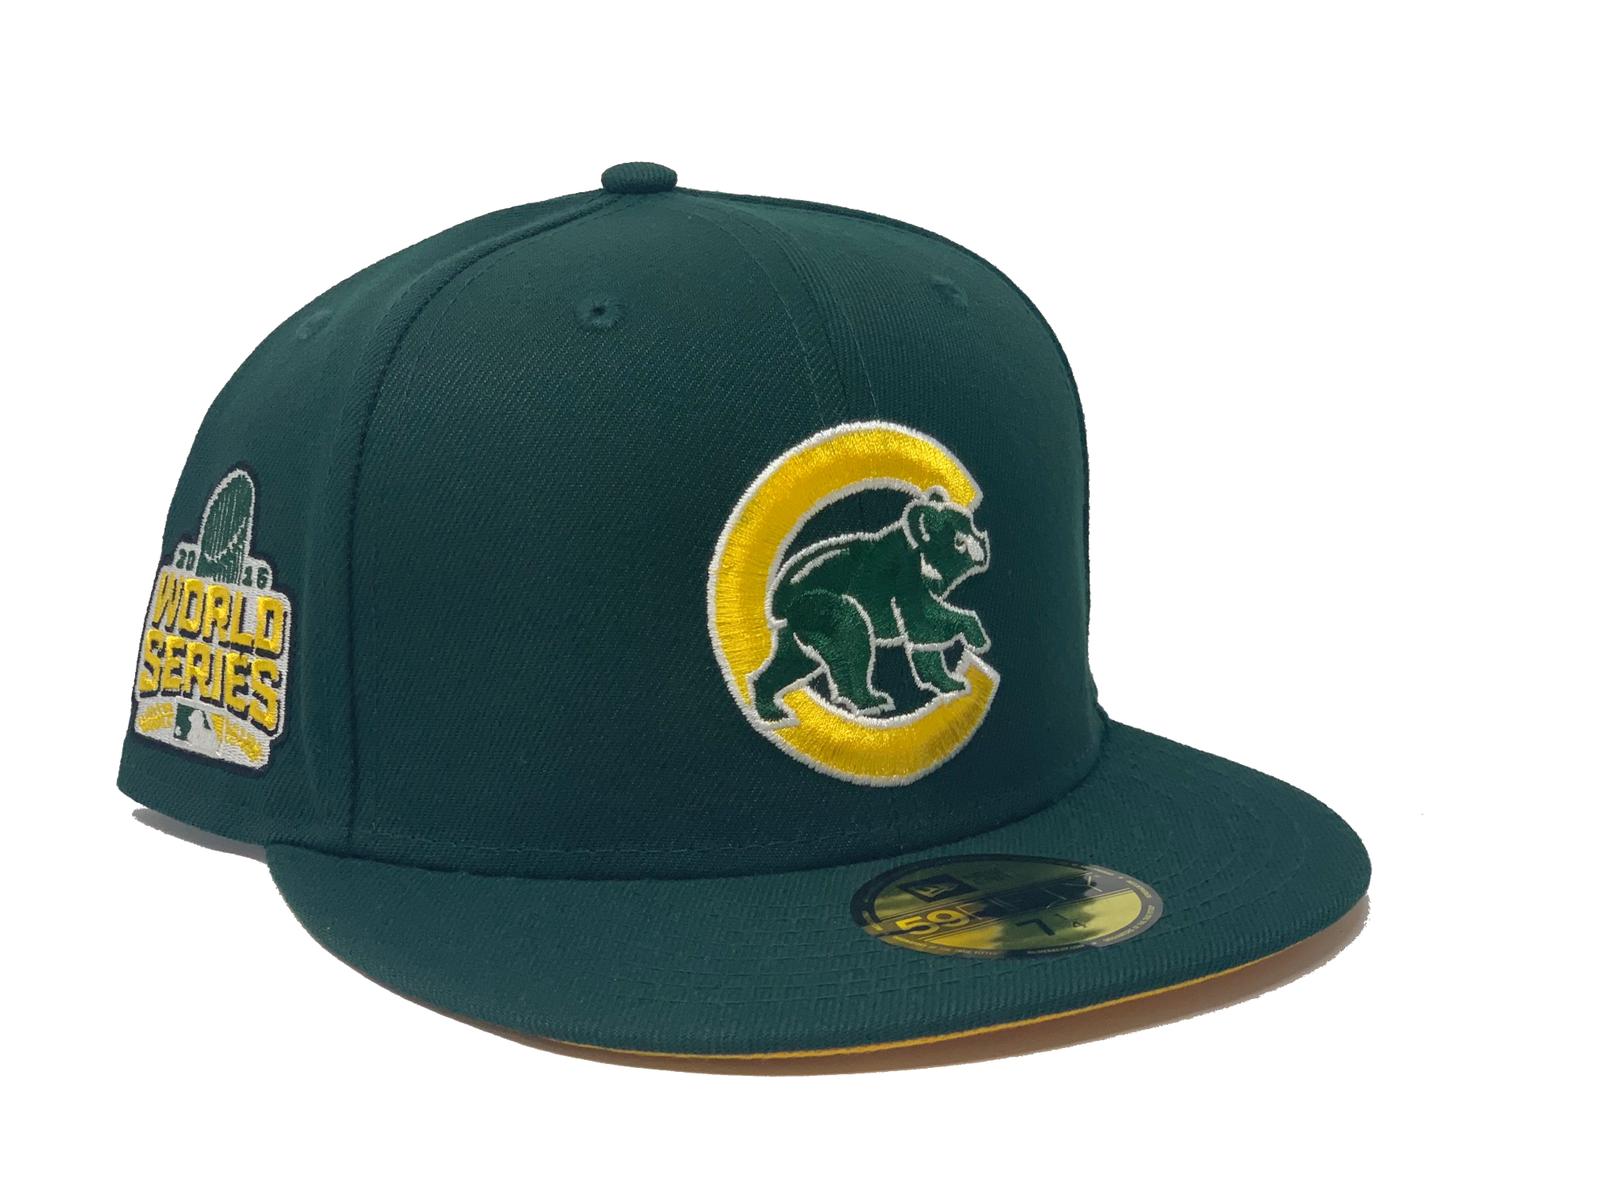 CHICAGO CUBS 2016 WORLD SERIES FOREST PACK GREEN YELLOW BRIM NEW